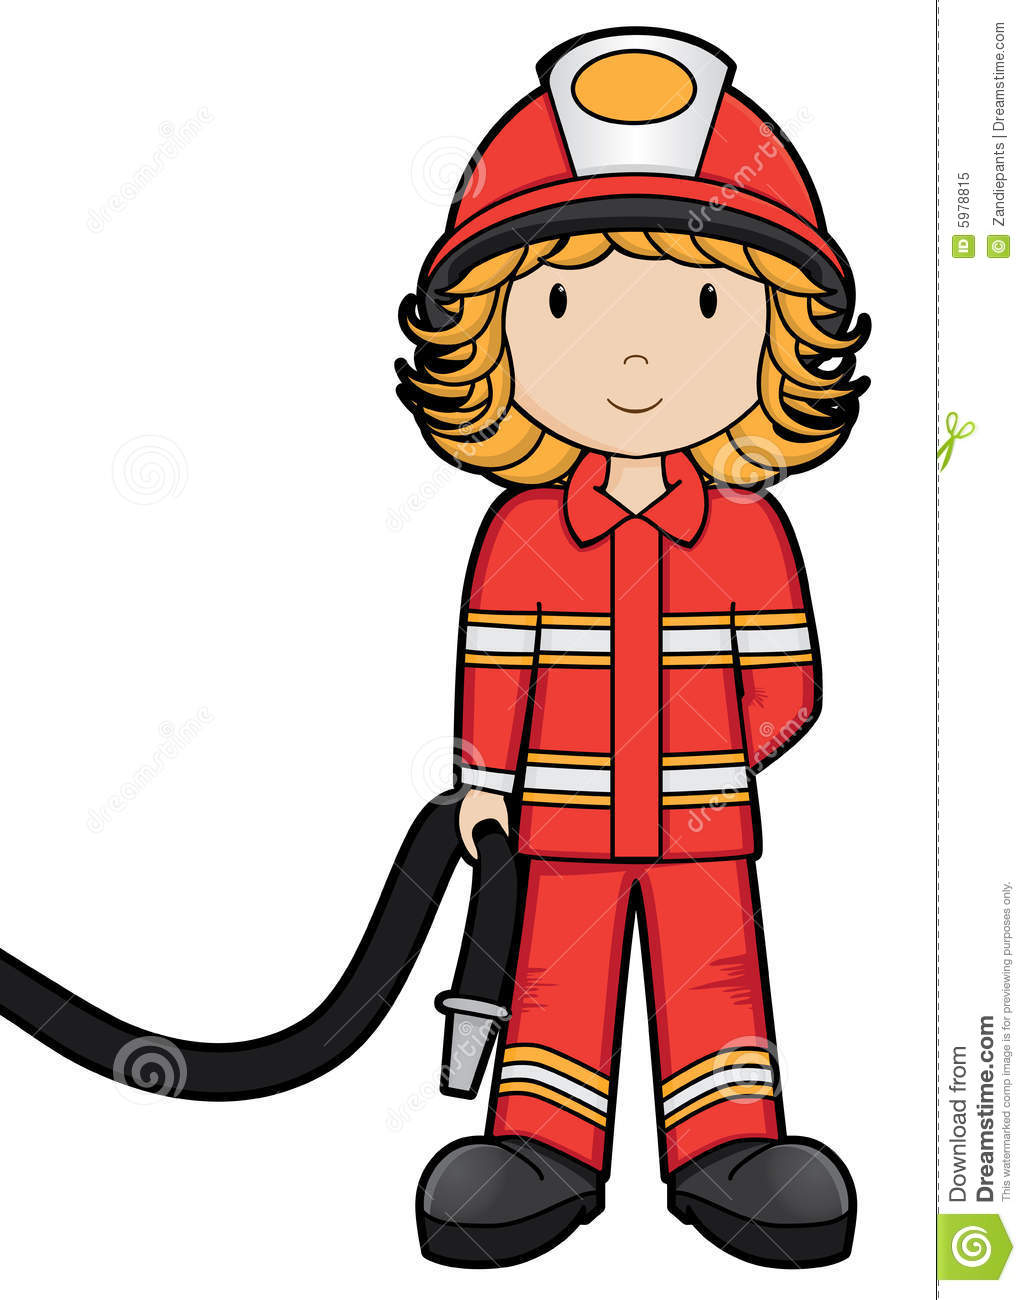 Fire Girl   Vector Royalty Free Stock Photo   Image  5978815